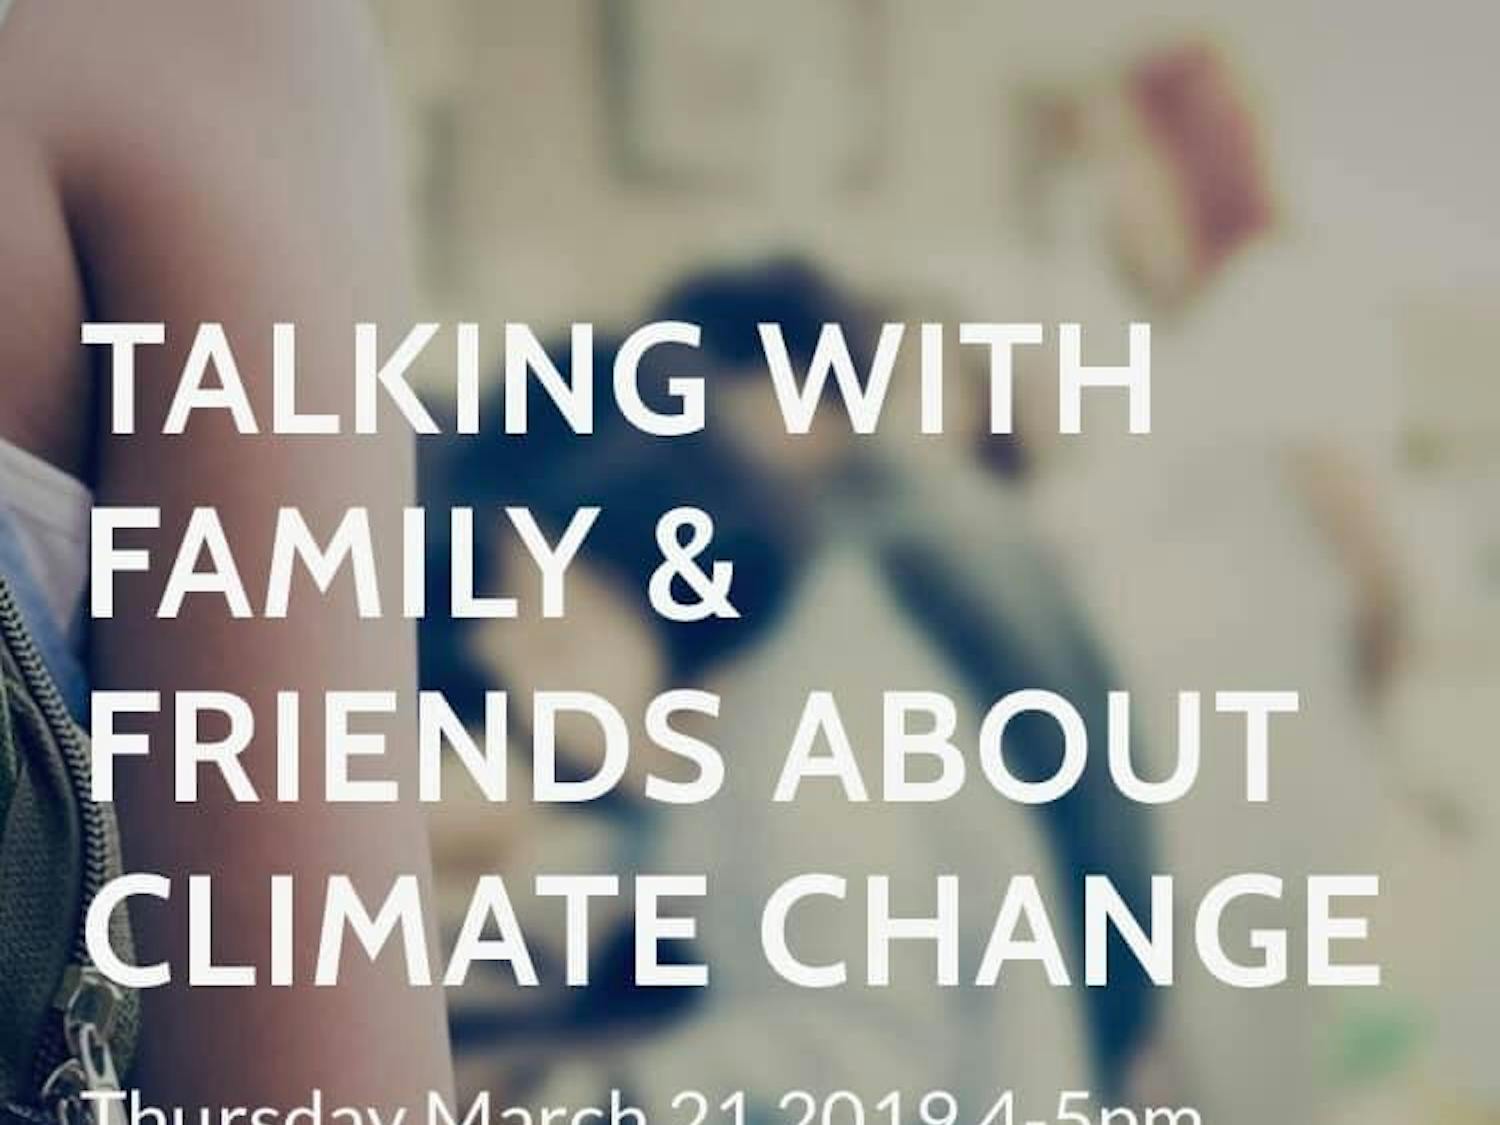 Talking with family and friends about climate change